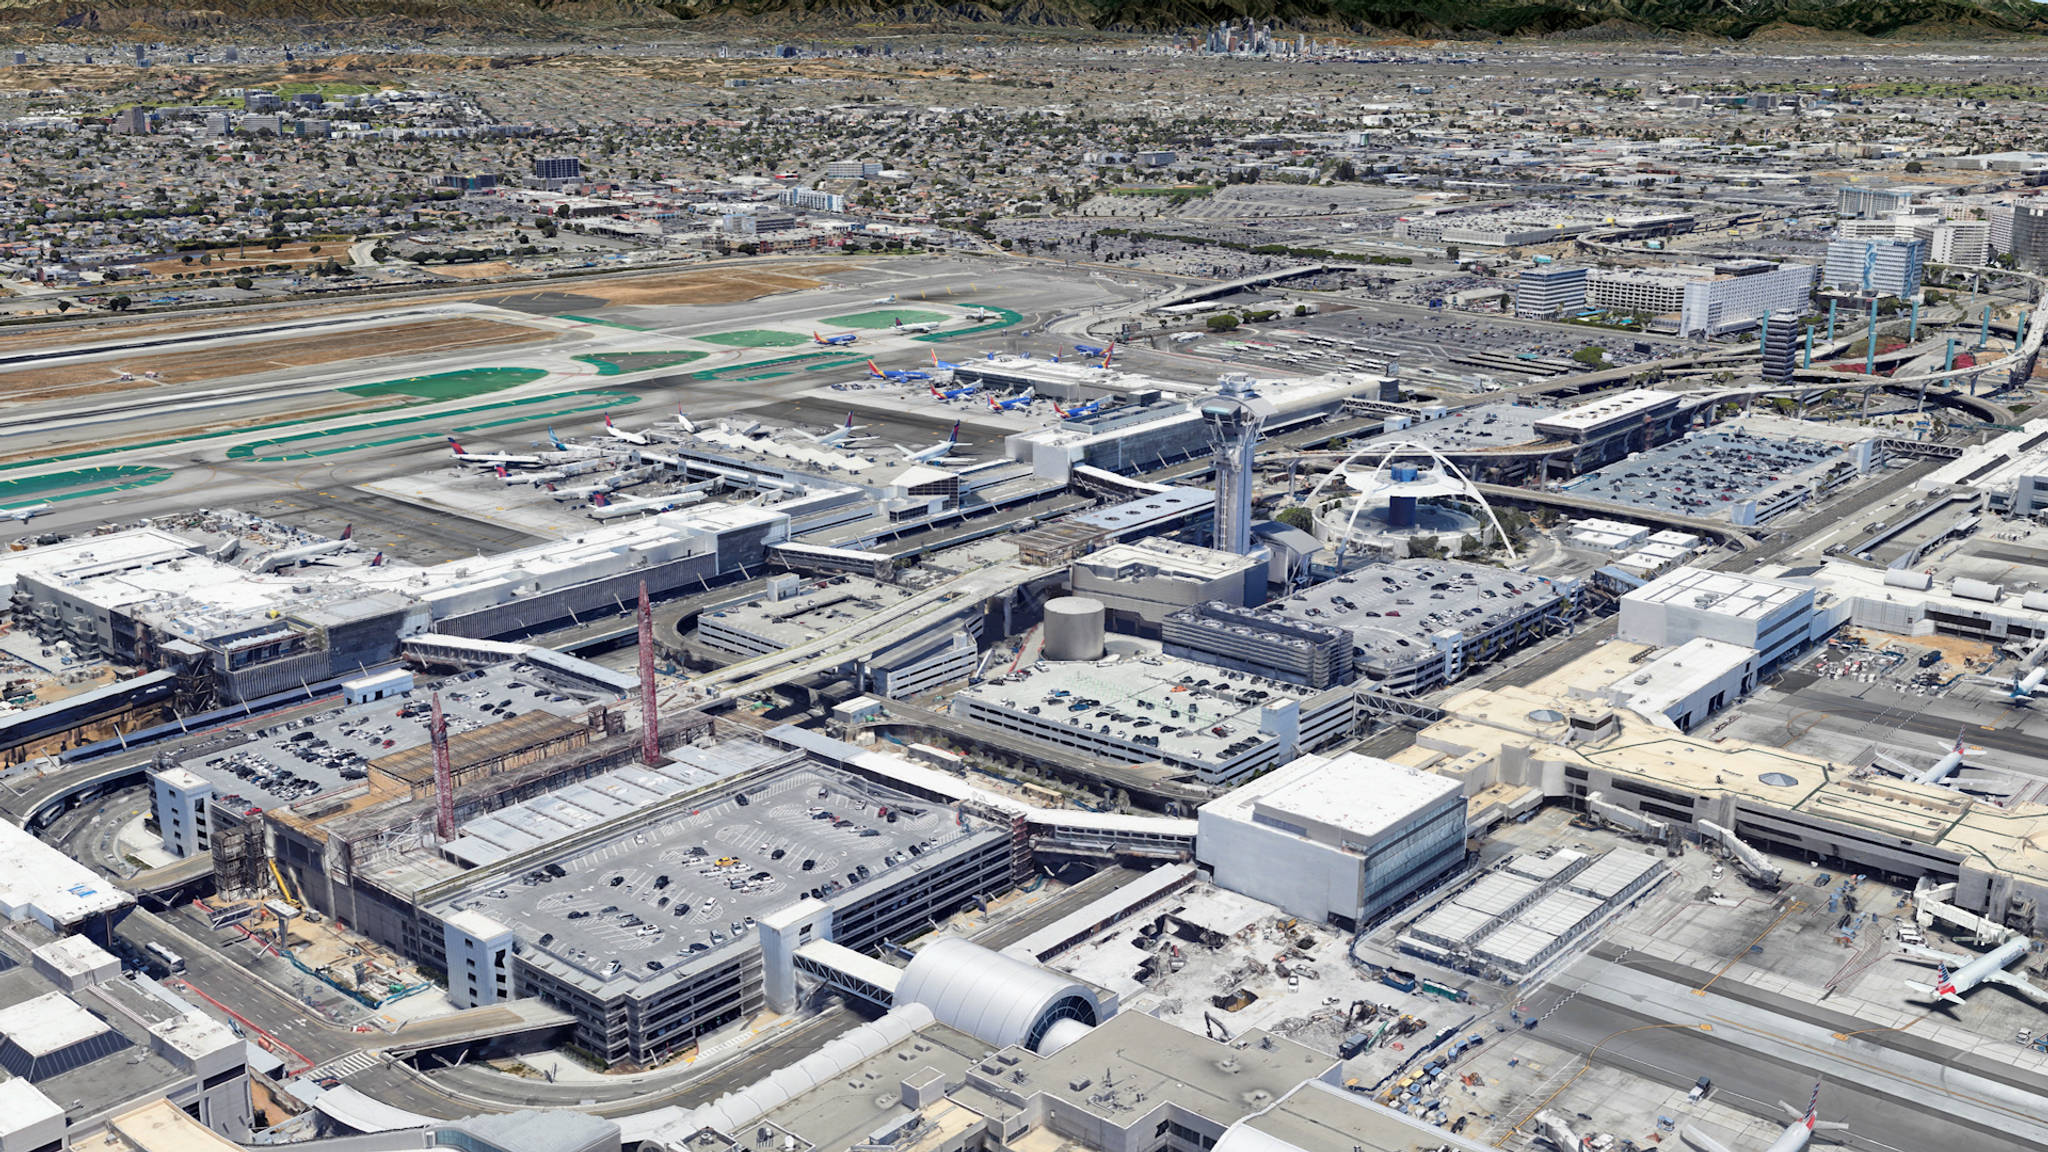  Aerial View of Los Angeles Airport Parking